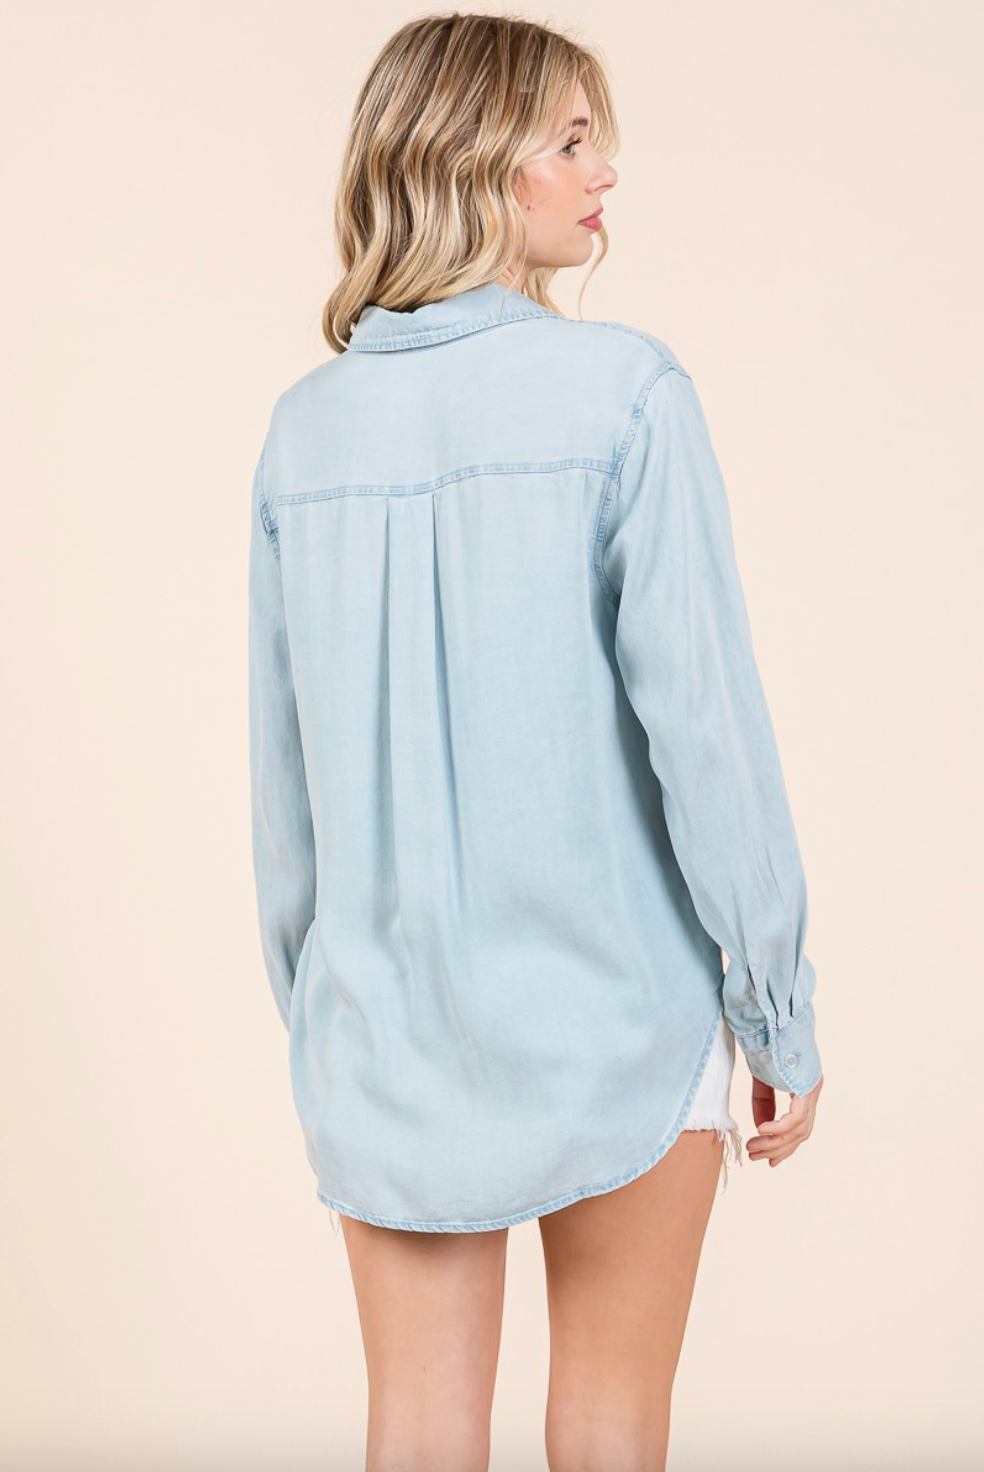 Chambray Button Down Long Sleeve Top S-L